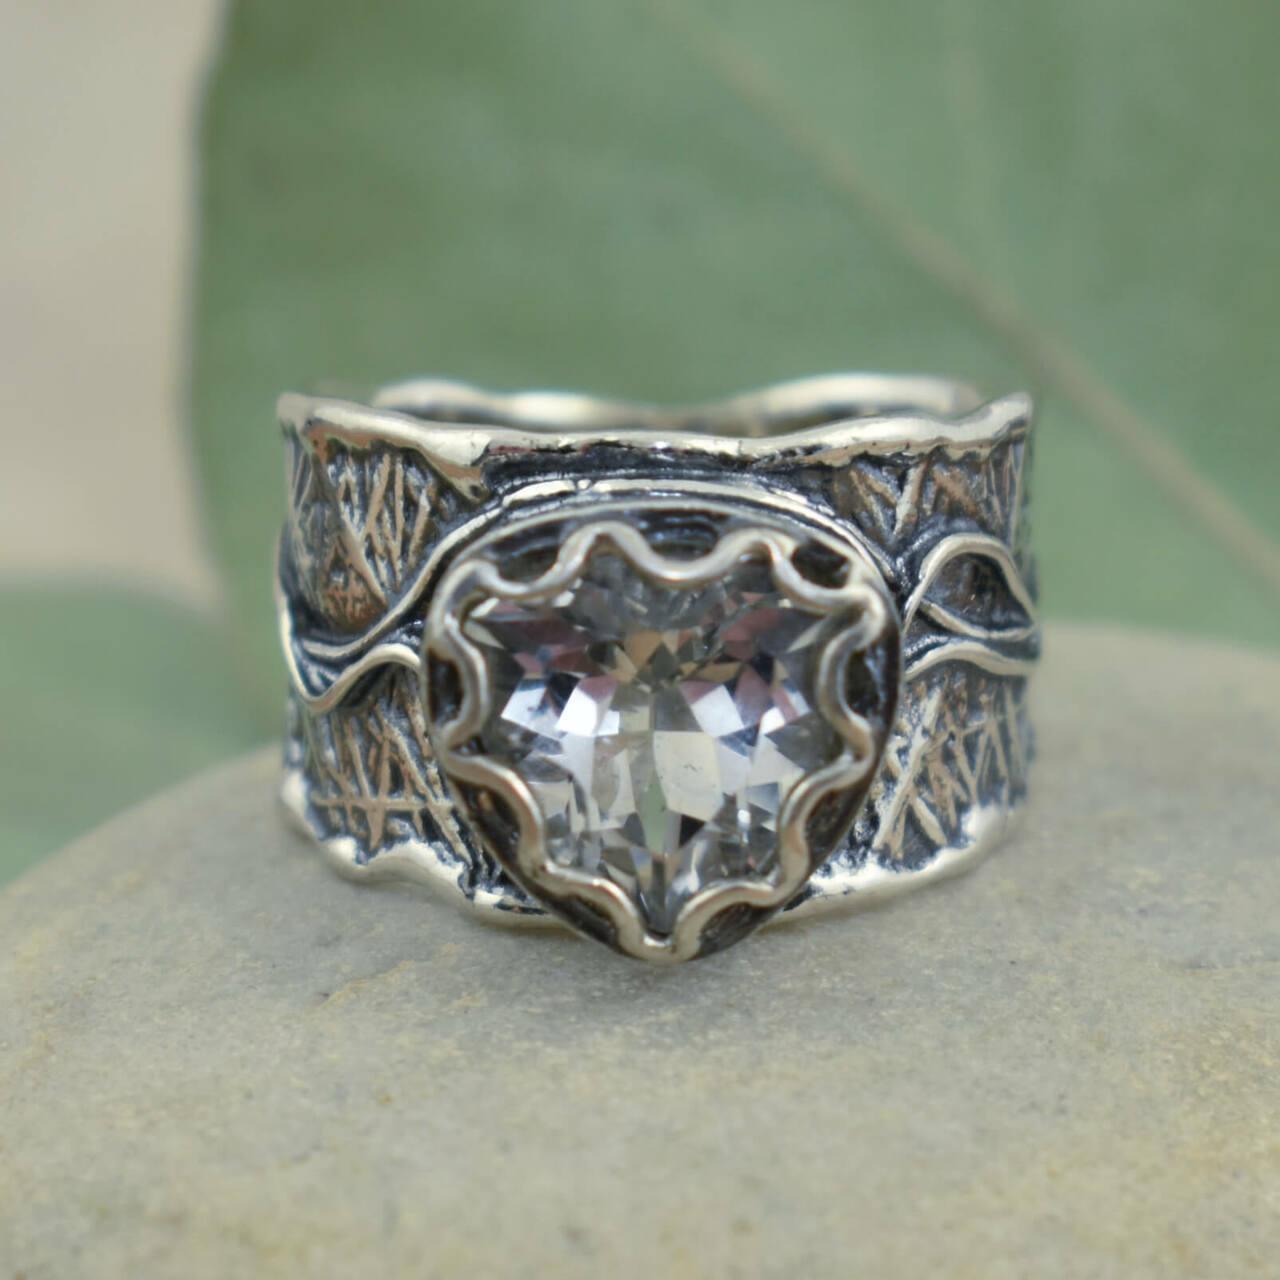 Handcrafted wide band ring She's a Natural Ring - White Topaz